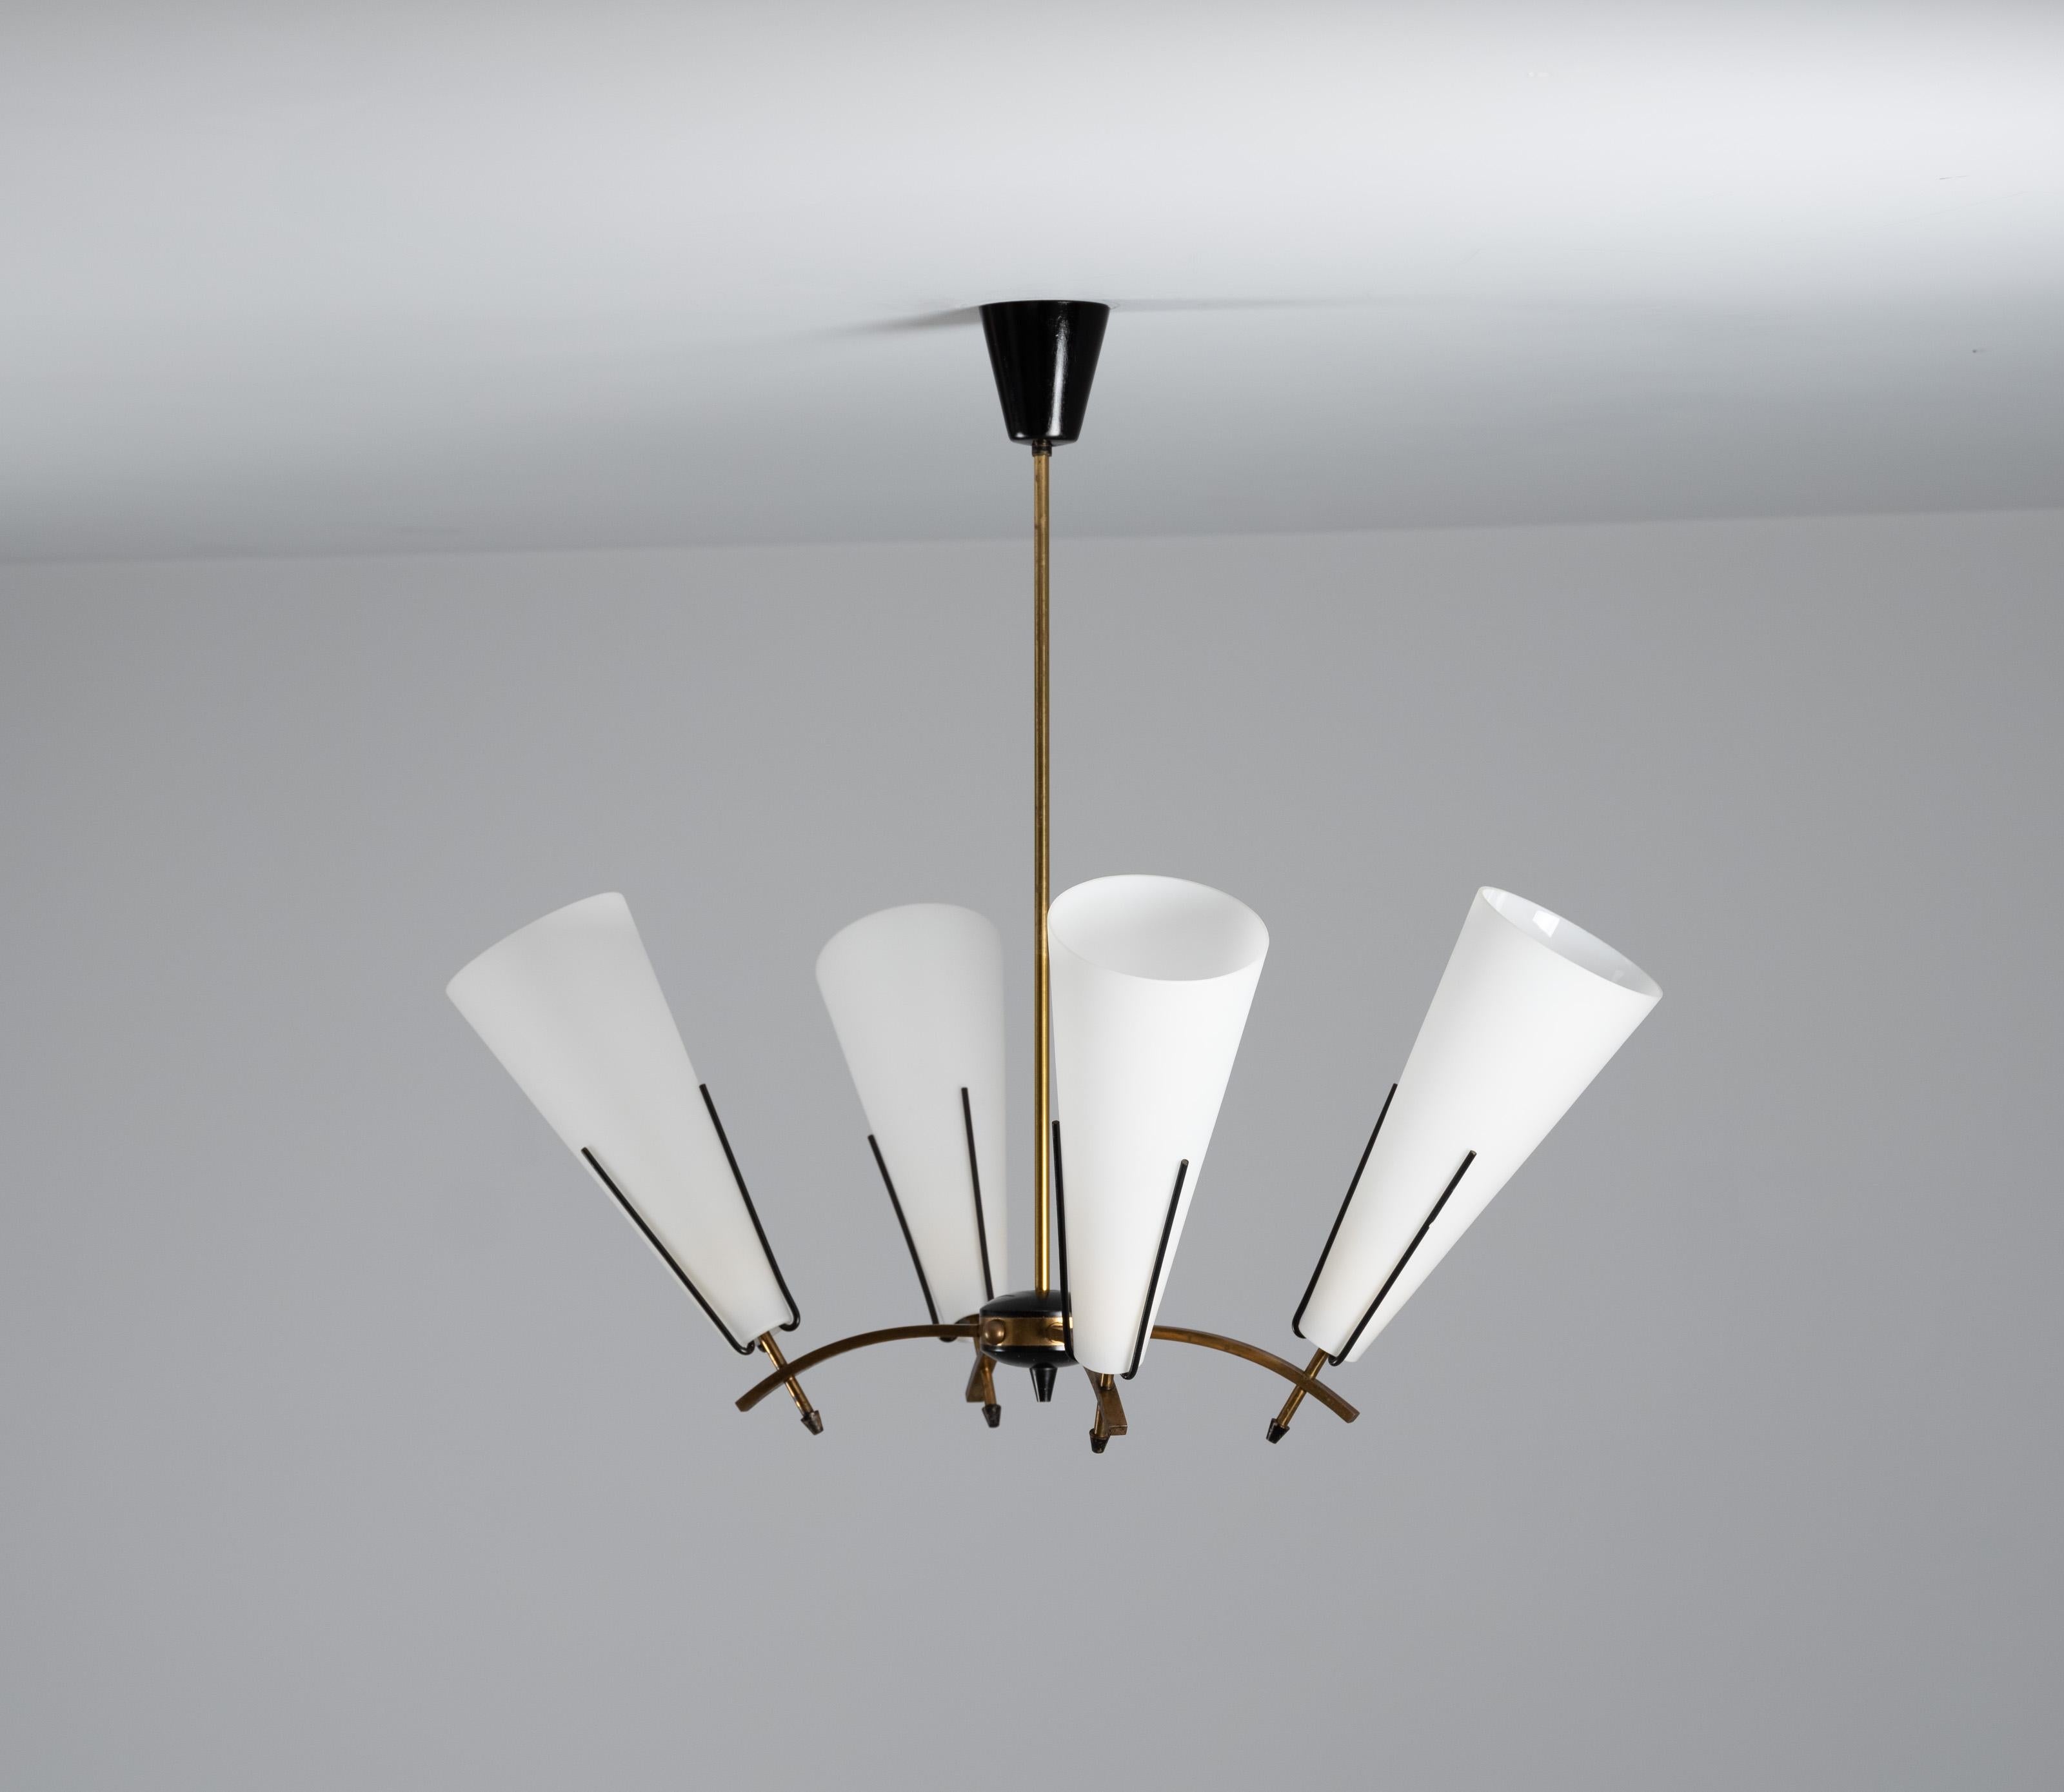 Stilnovo 1950s Chandelier in Brass and 4 Conical Opals, Vintage Italian Design For Sale 2